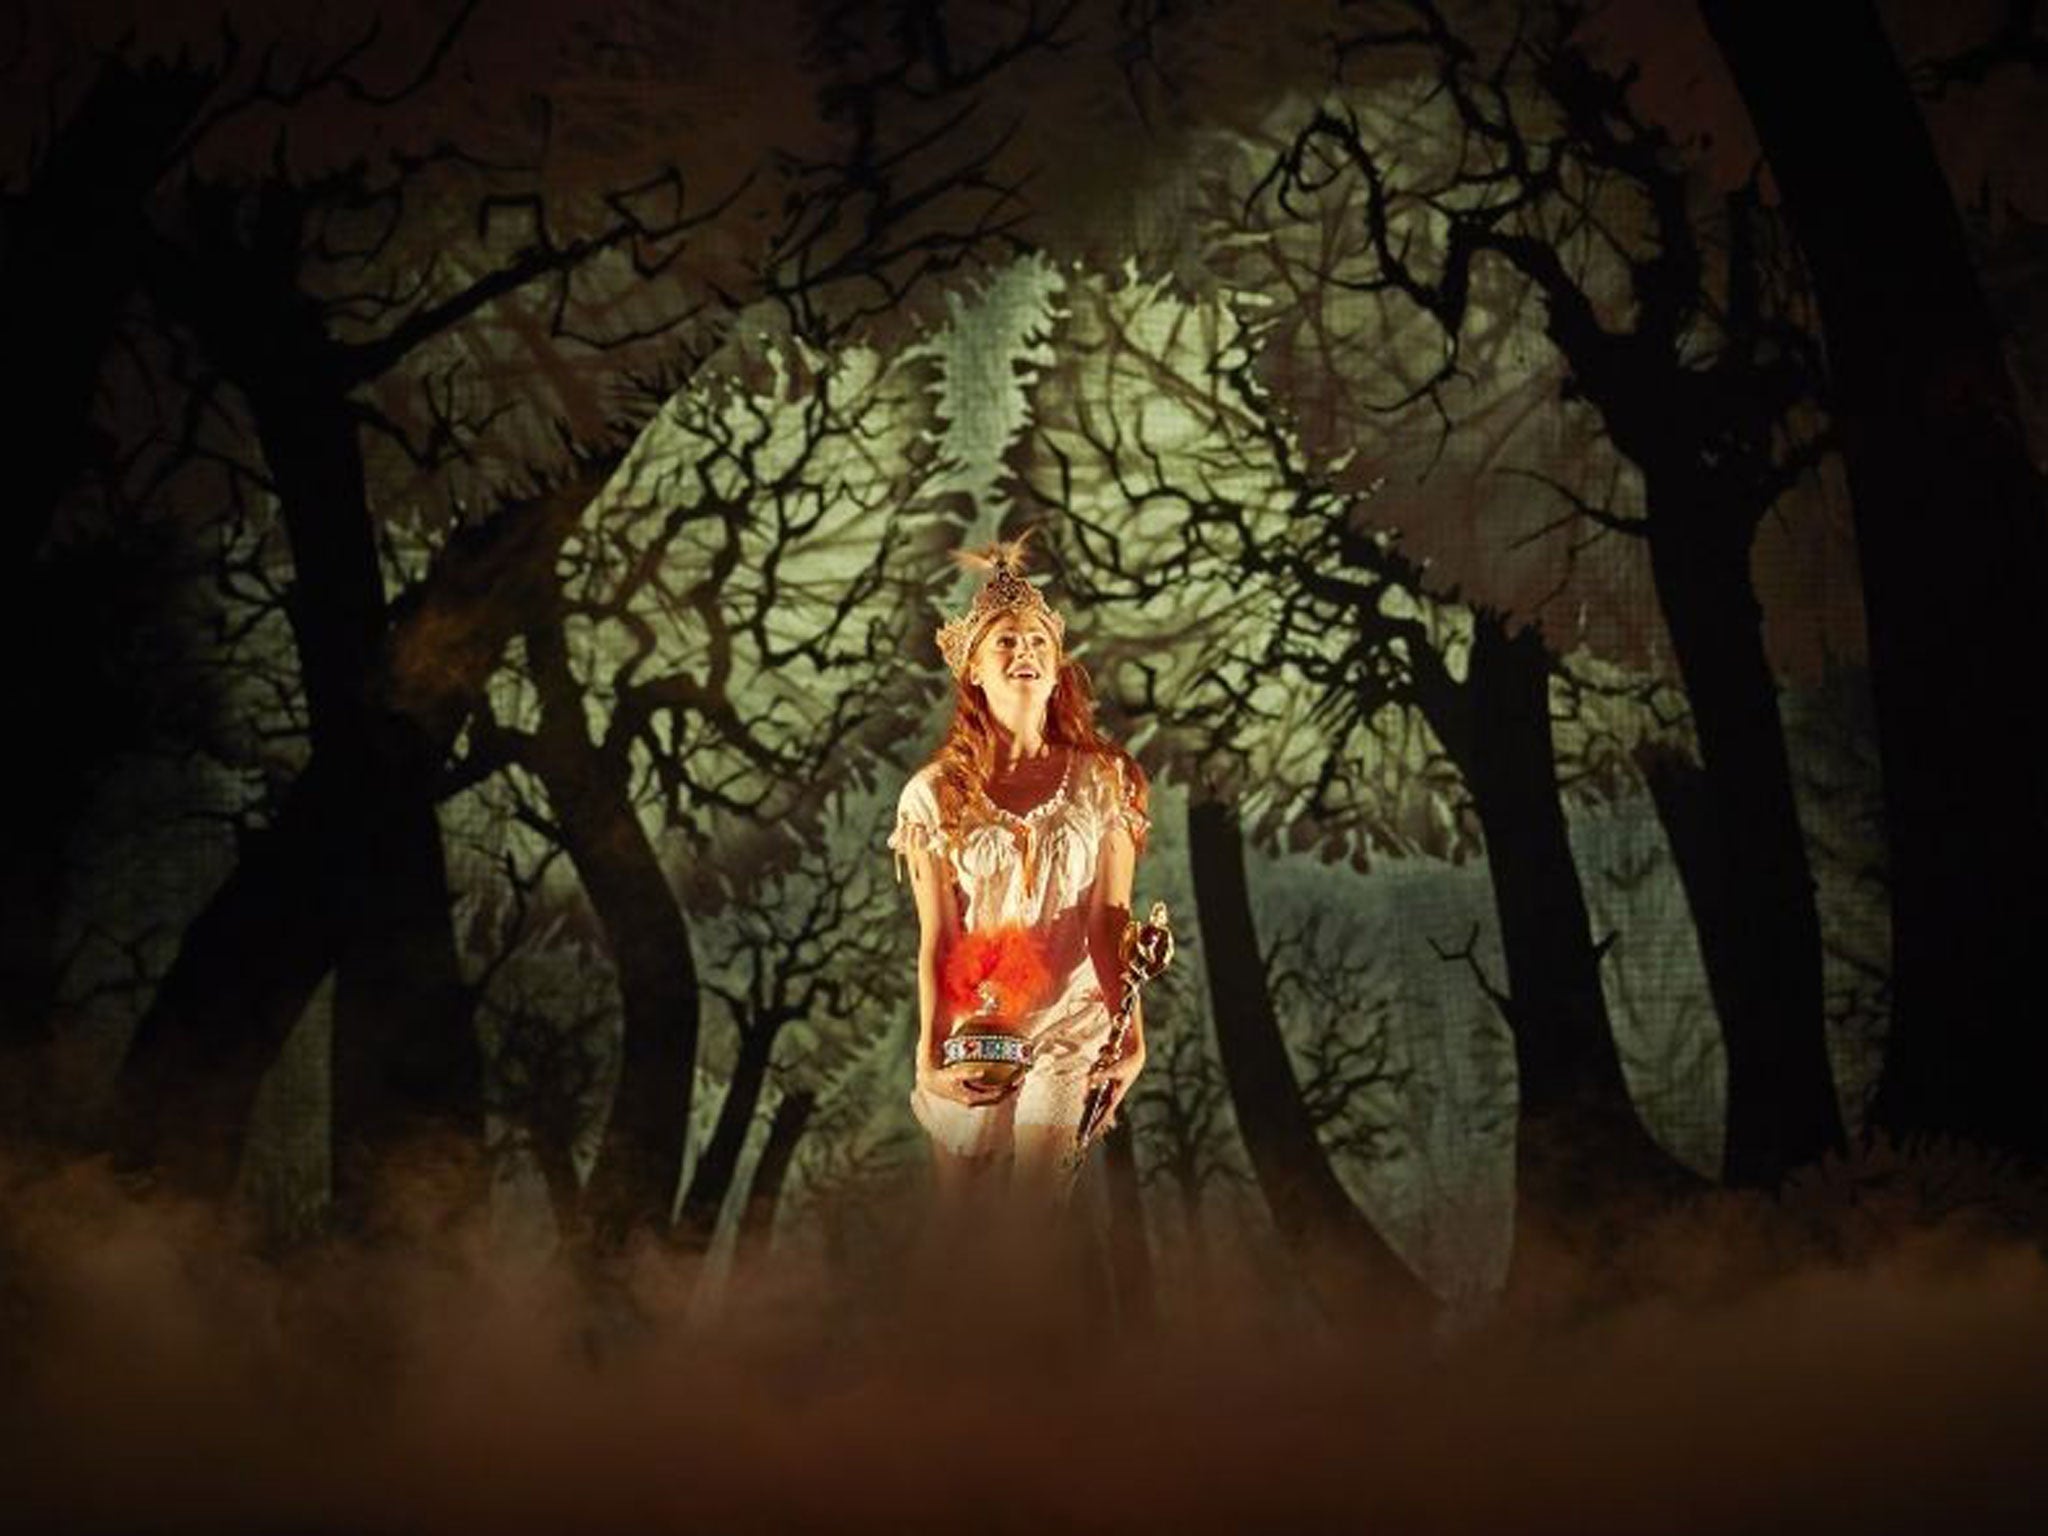 Into the woods: Rosalie Craig stars as the eponymous Princess in Tori Amos’ new musical